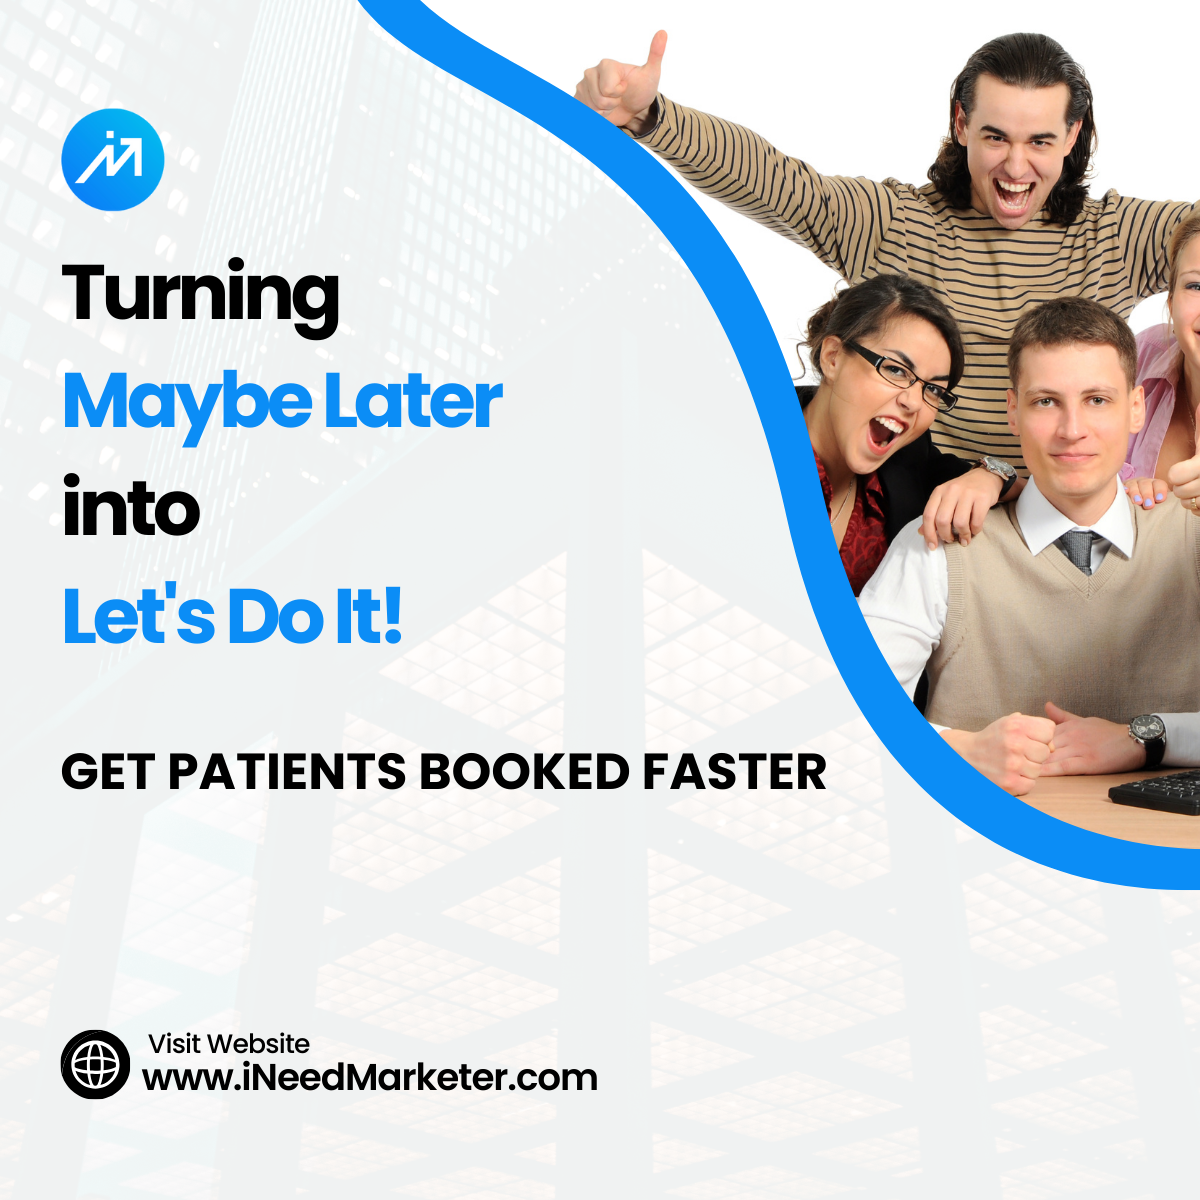 Get Patients Booked Faster